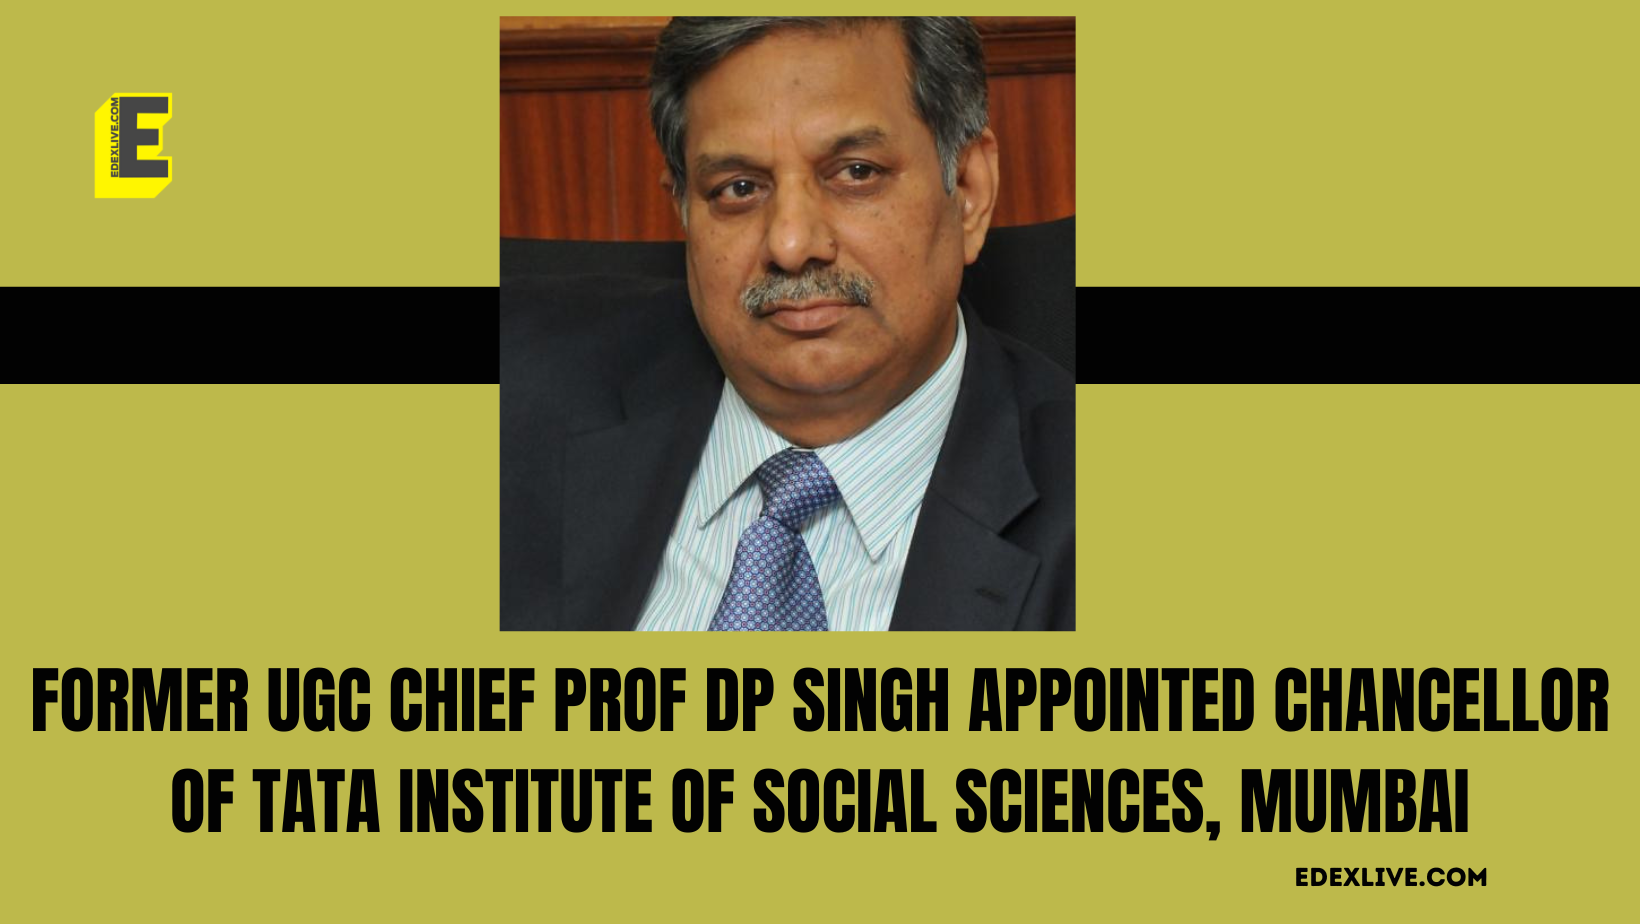 former ugc chief prof dp singh appointed chancellor of tata institute of social sciences, mumbai